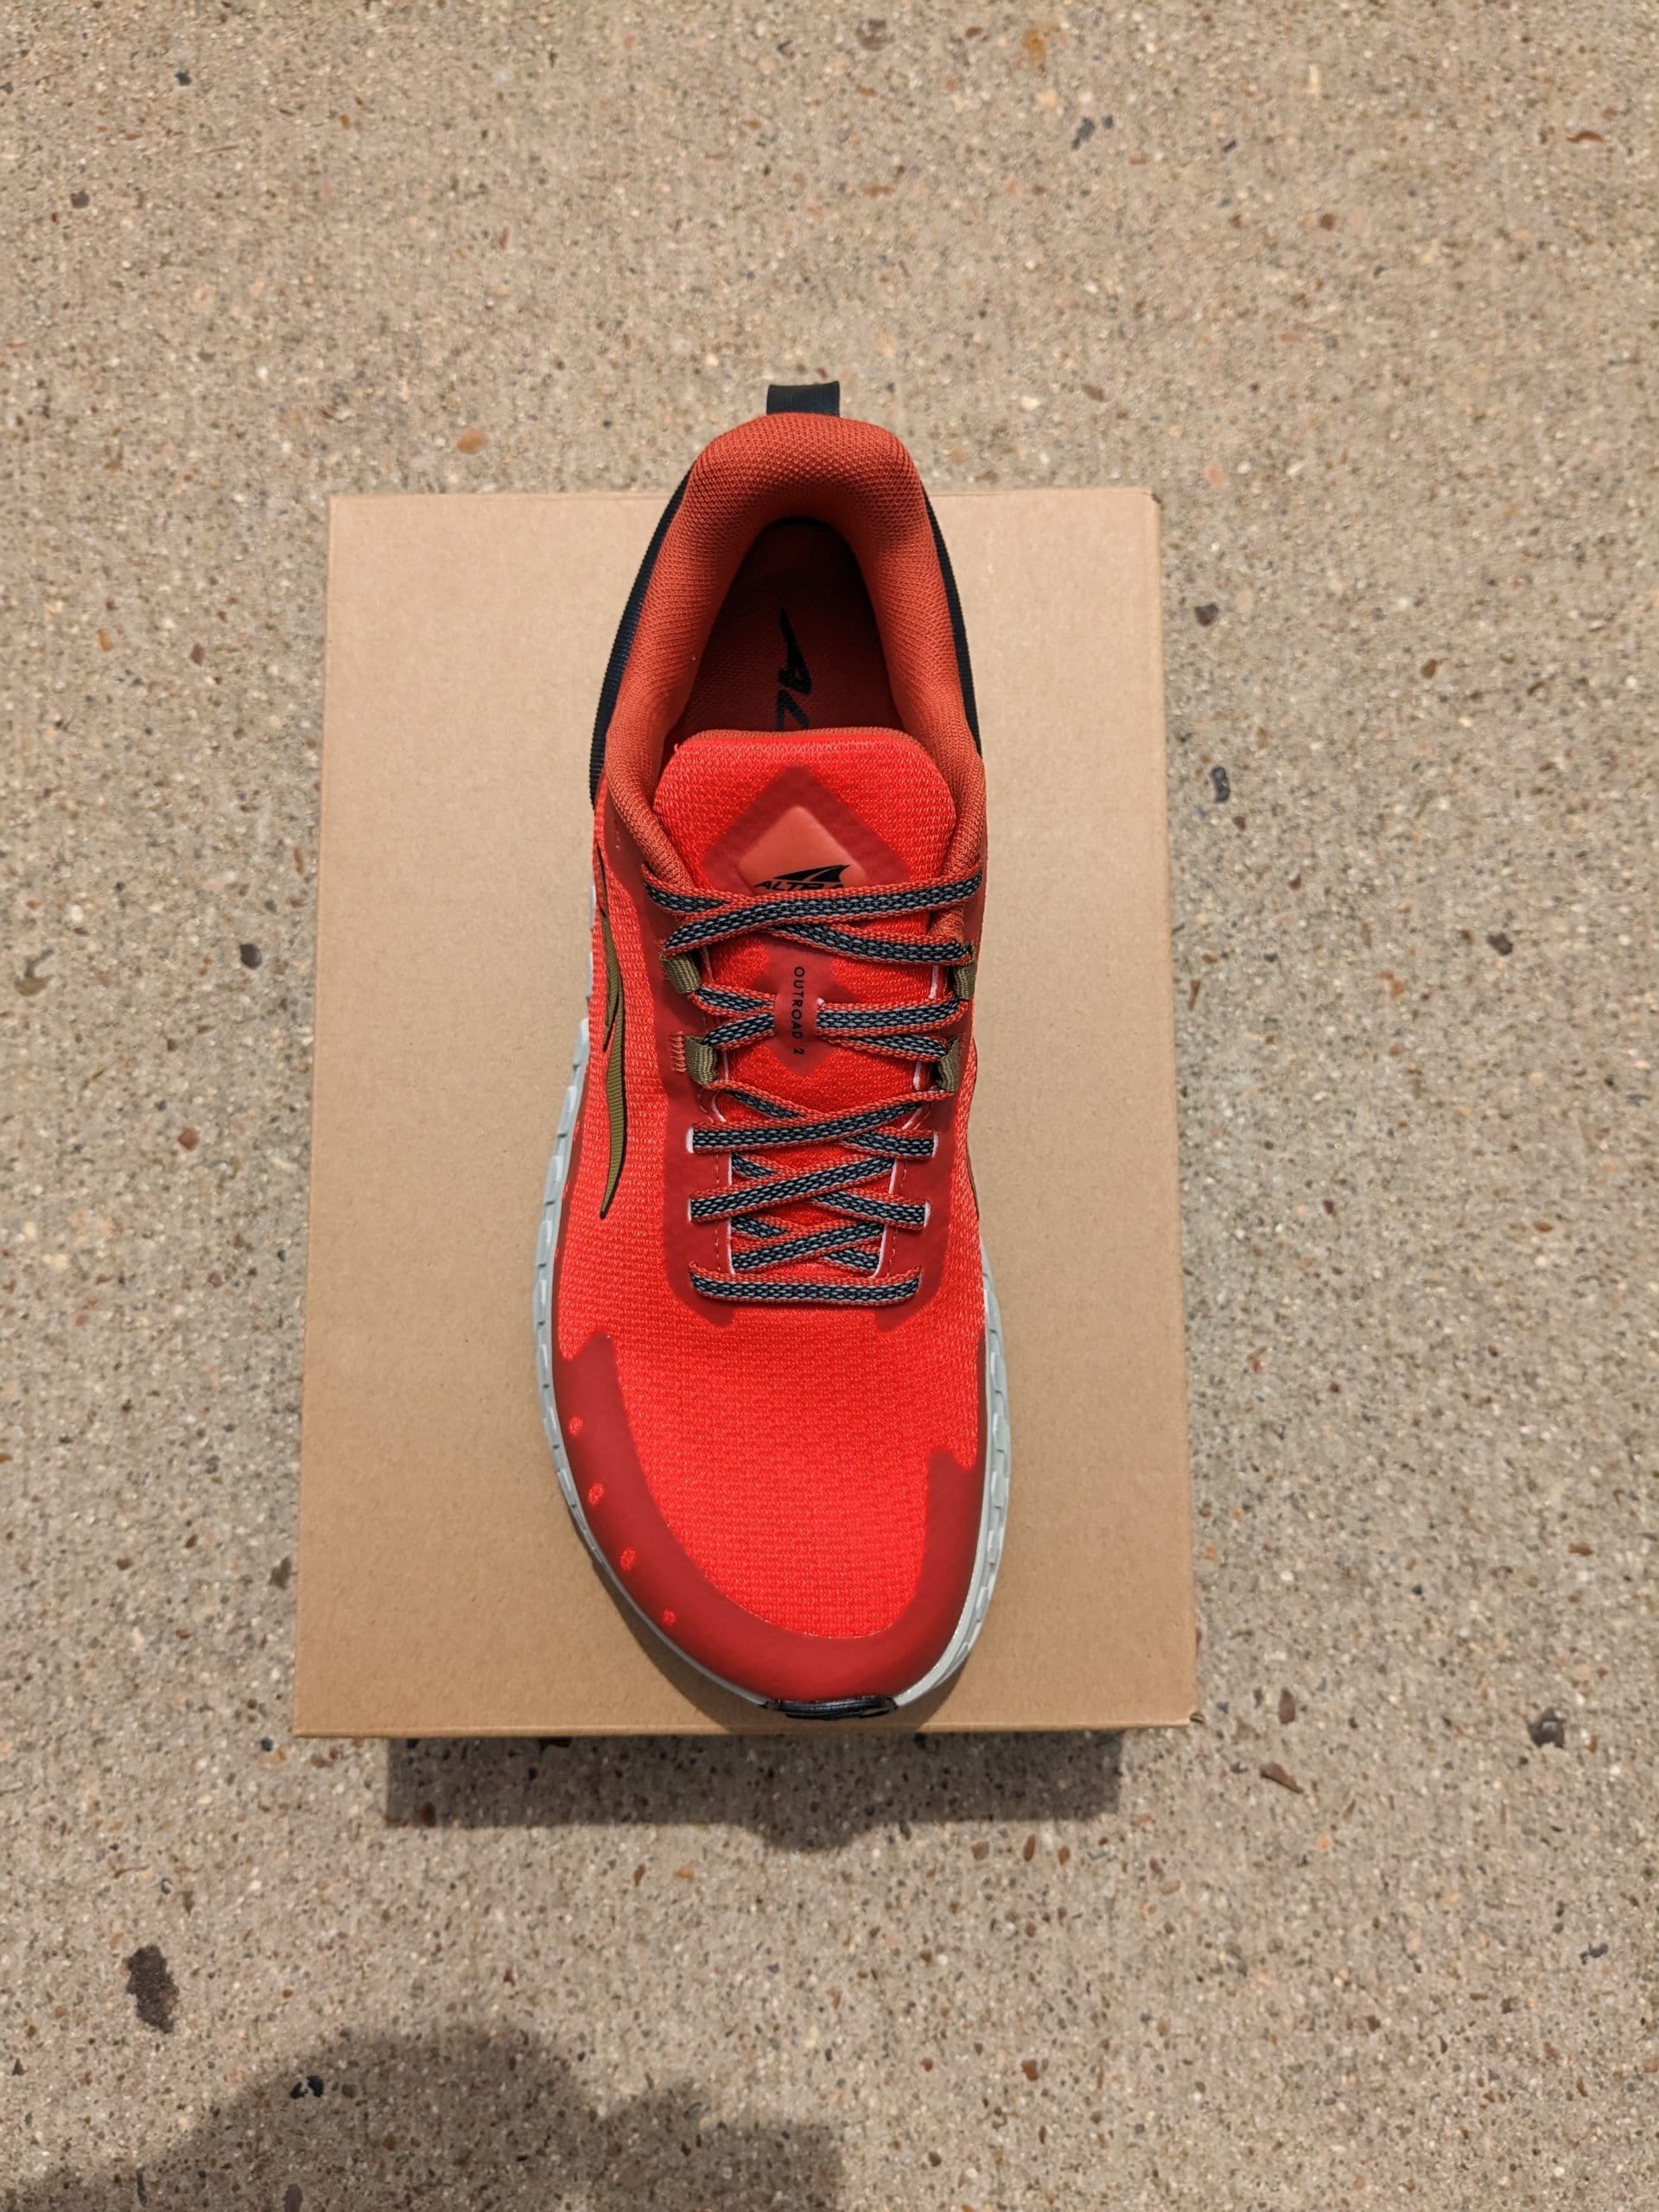 Altra Outroad 2 Review upper